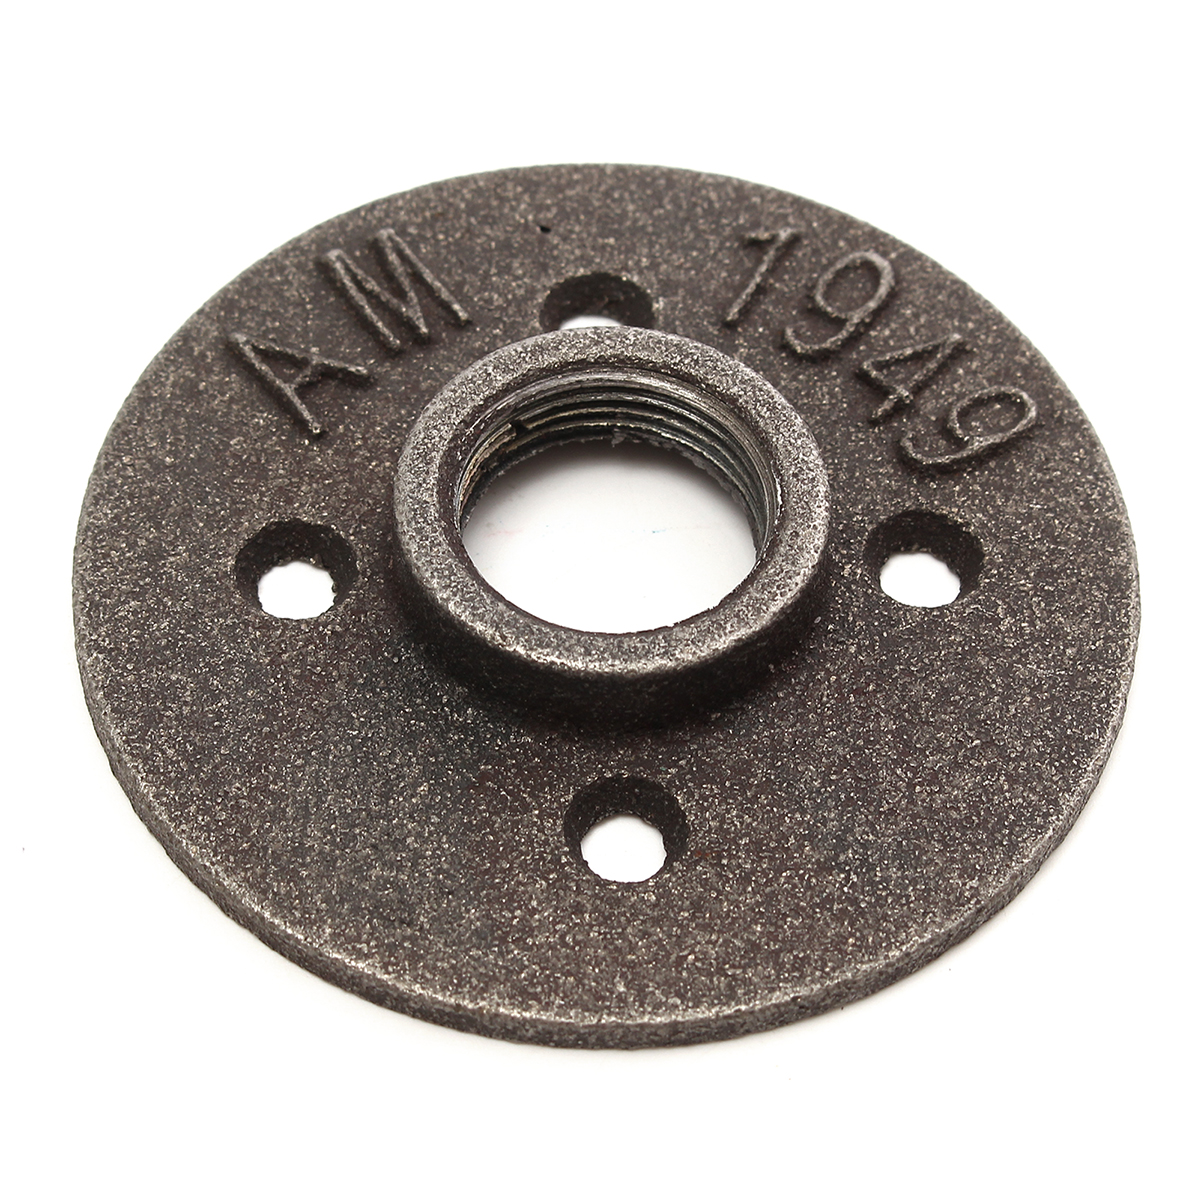 34-Inch-Black-Malleable-Iron-Floor-Flange-Fitting-Pipe-NPT-Antique-Wall-Flange-Seat-1132628-2